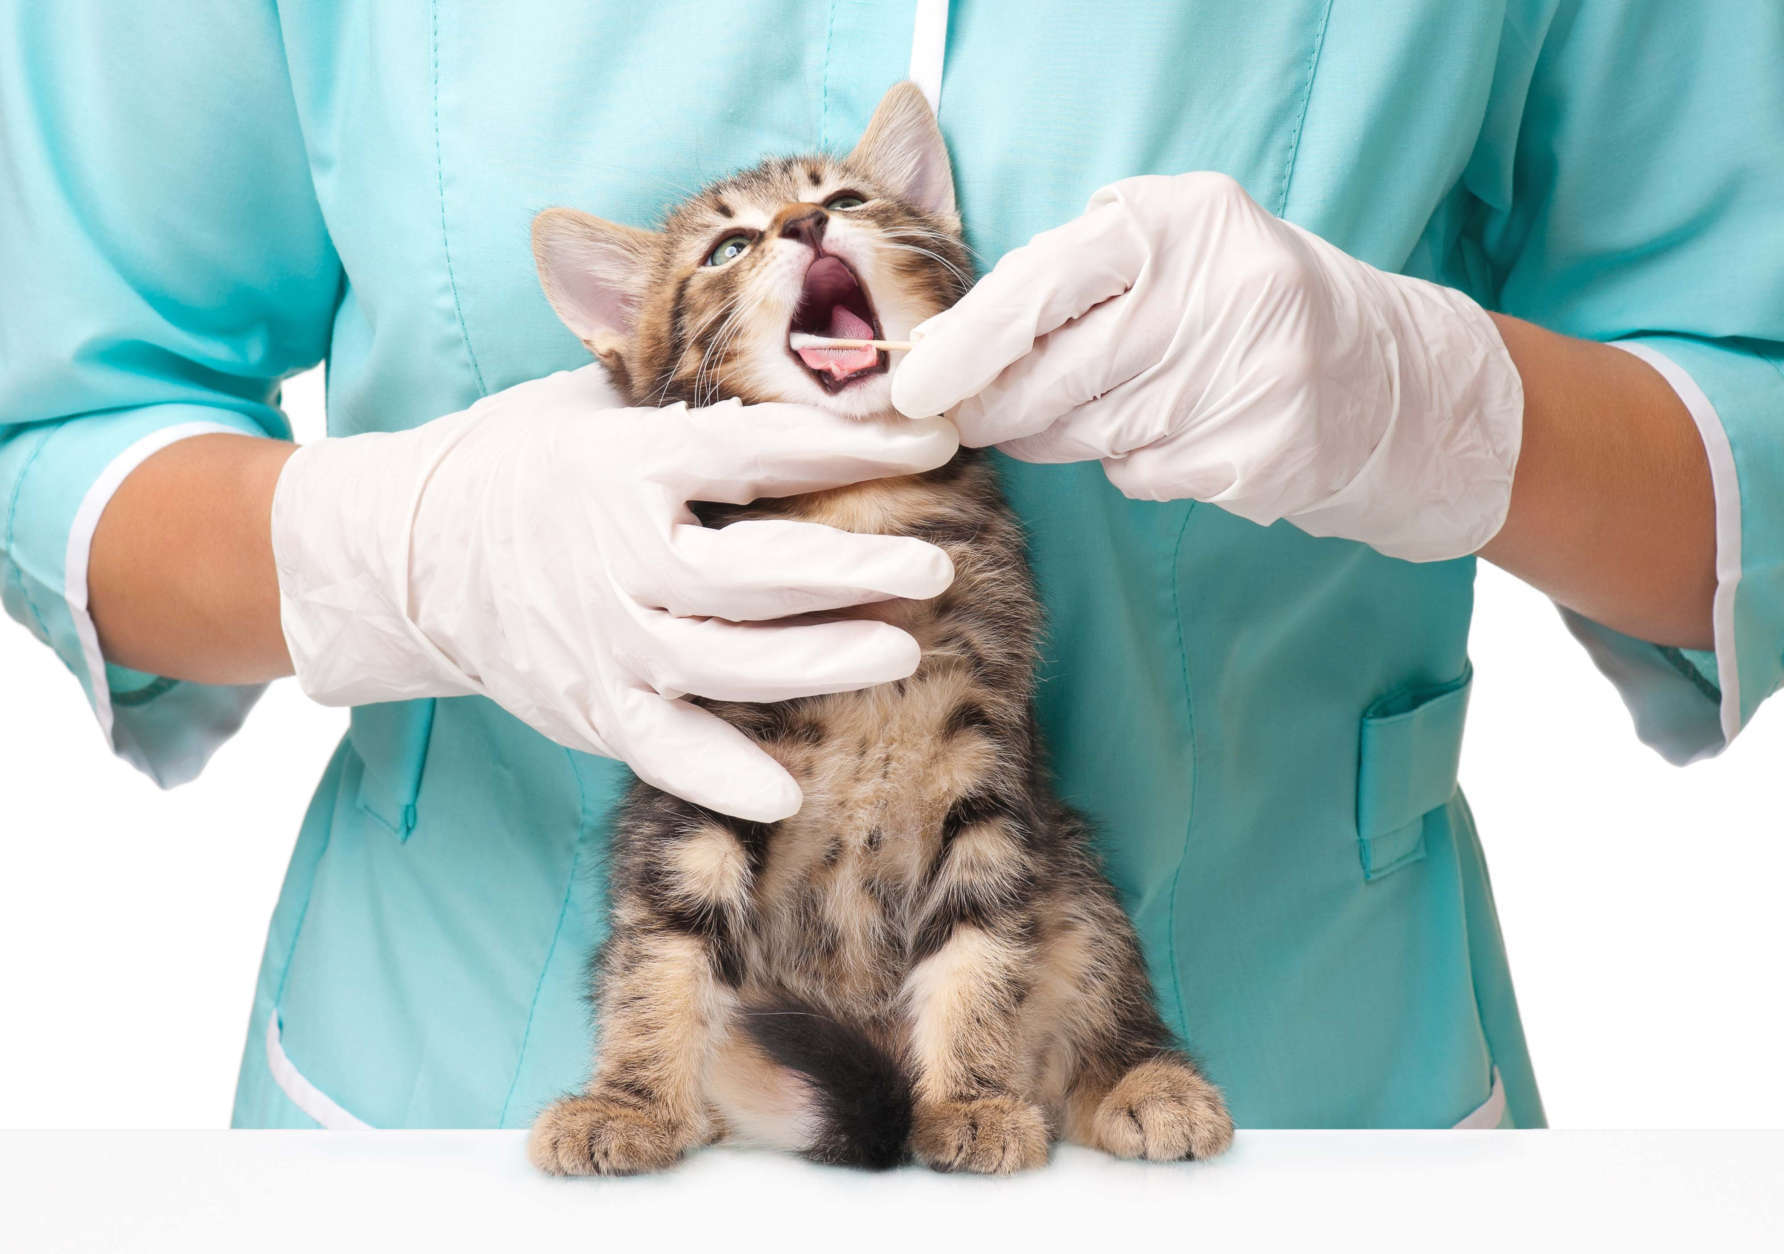 The veterinarian checks teeth to a small kitten over white background